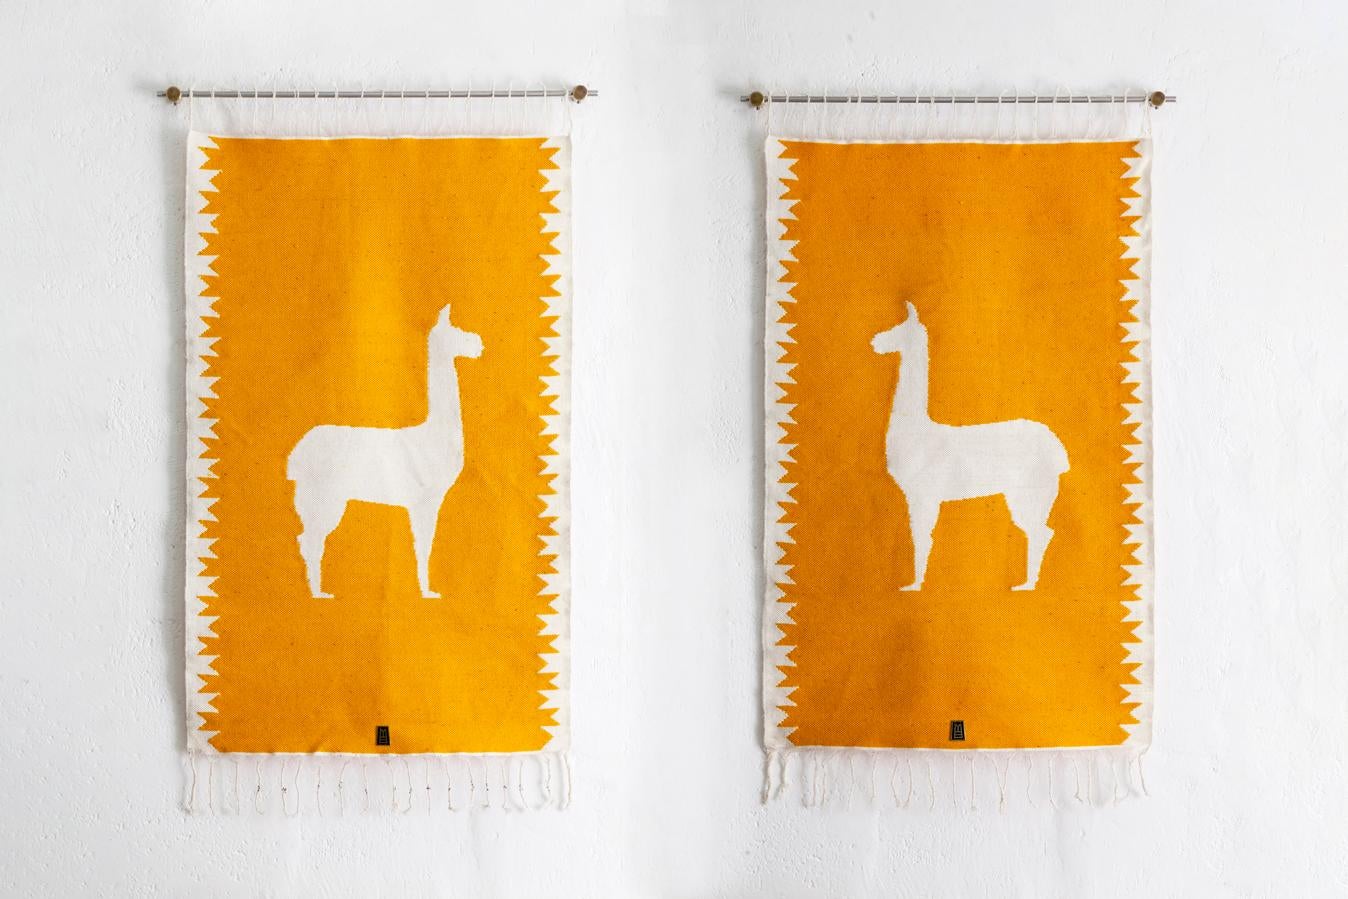 Handwoven sheep wool mirrored tapestries with wall-mounting lathed bronze bases, and stainless steel rod.

Capturing the essence of the Andes, these pieces are created using ancient weaving techniques yet loomed through an innovative approach to